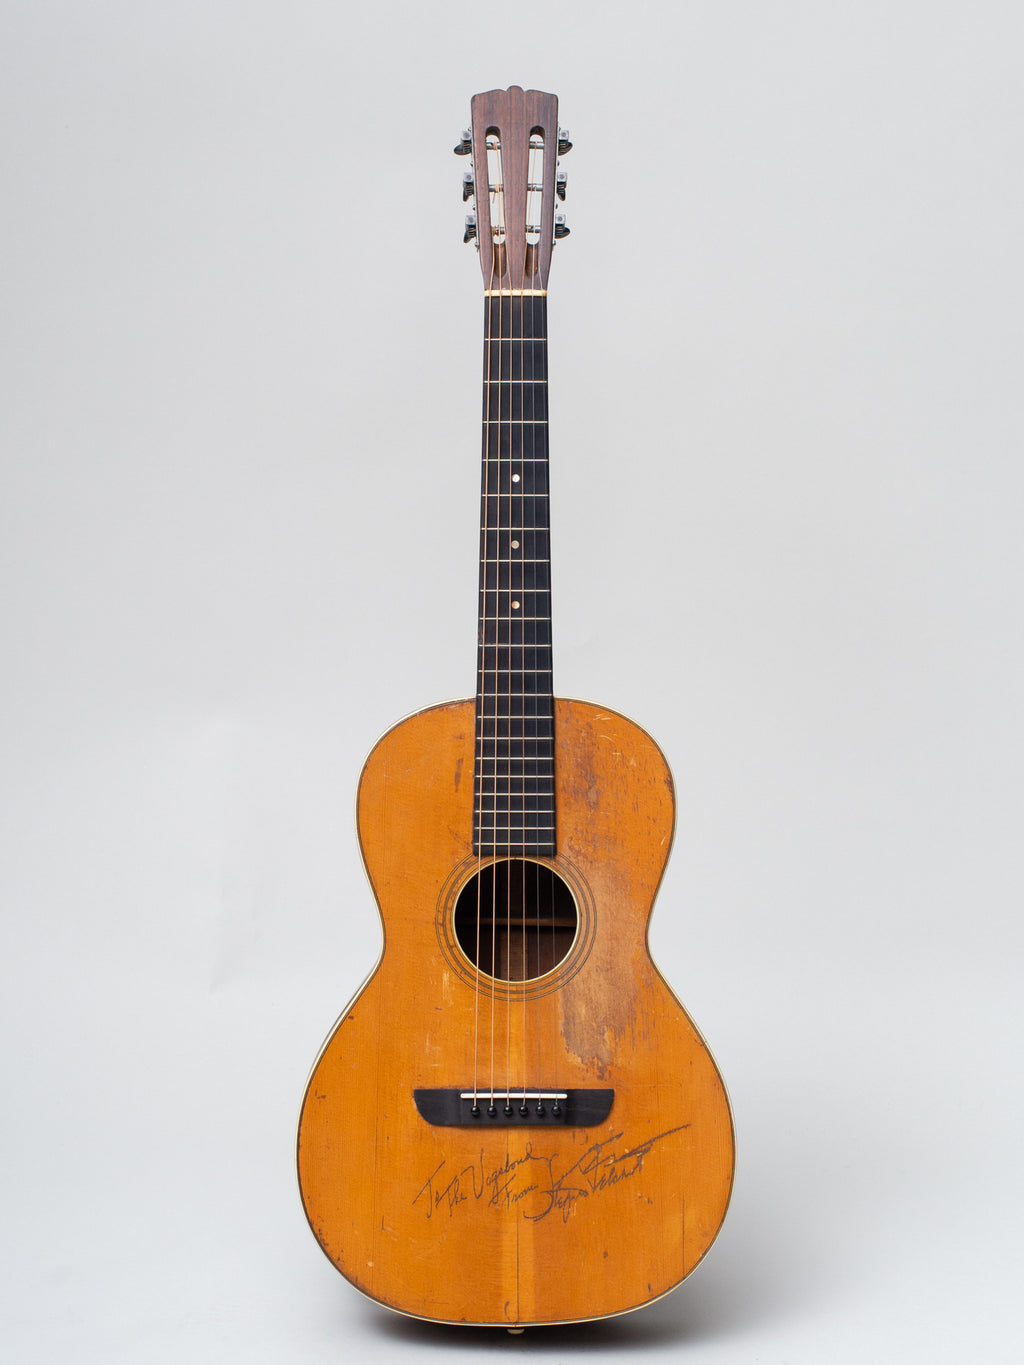 C. 1935 Washburn 5201 signed by Stepin Fetchit